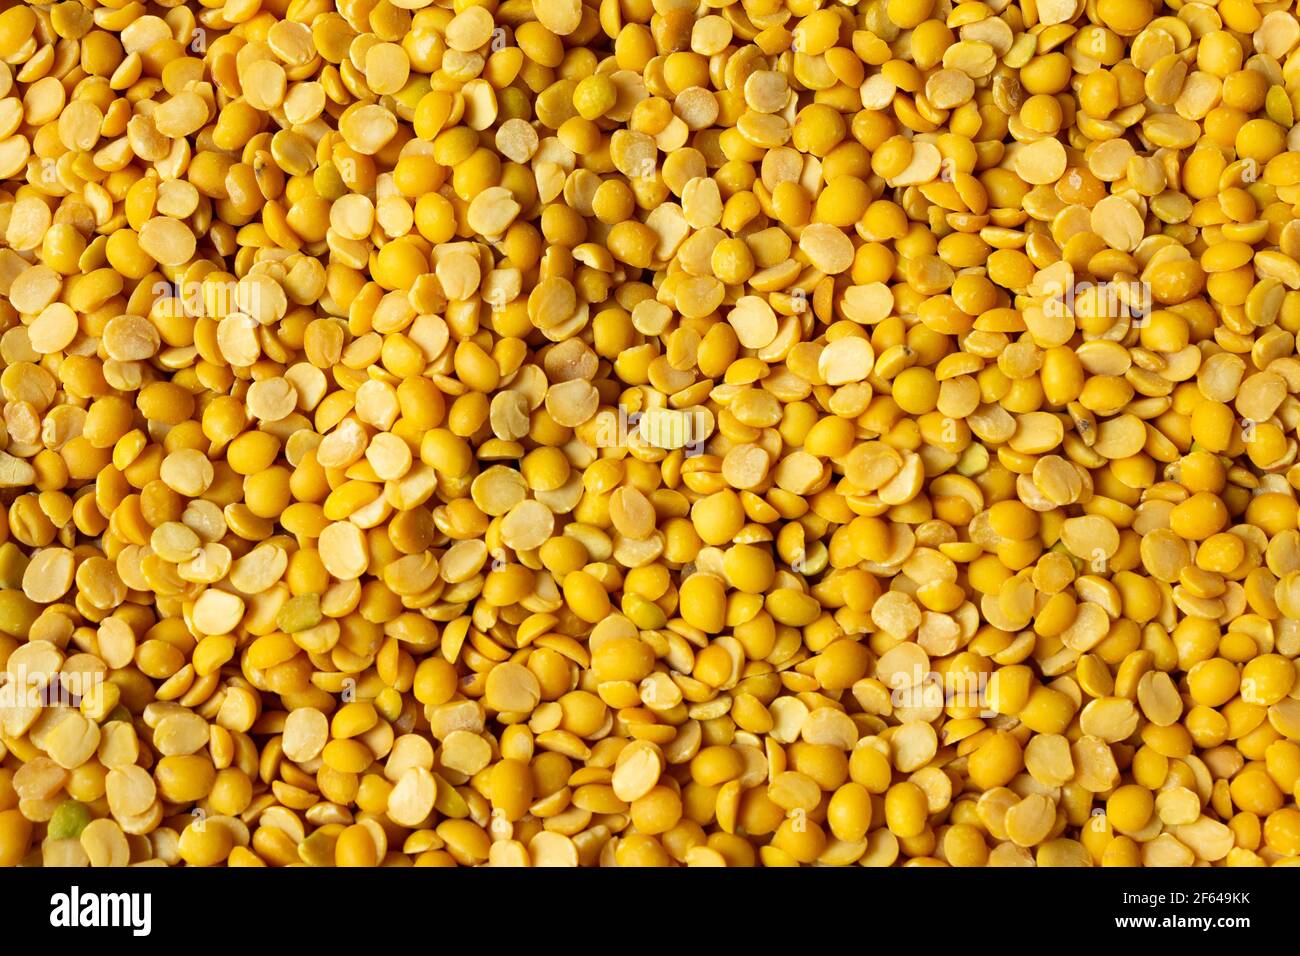 Pigeon pea (also known as tur dal) is a common staple food in south asia. Stock Photo